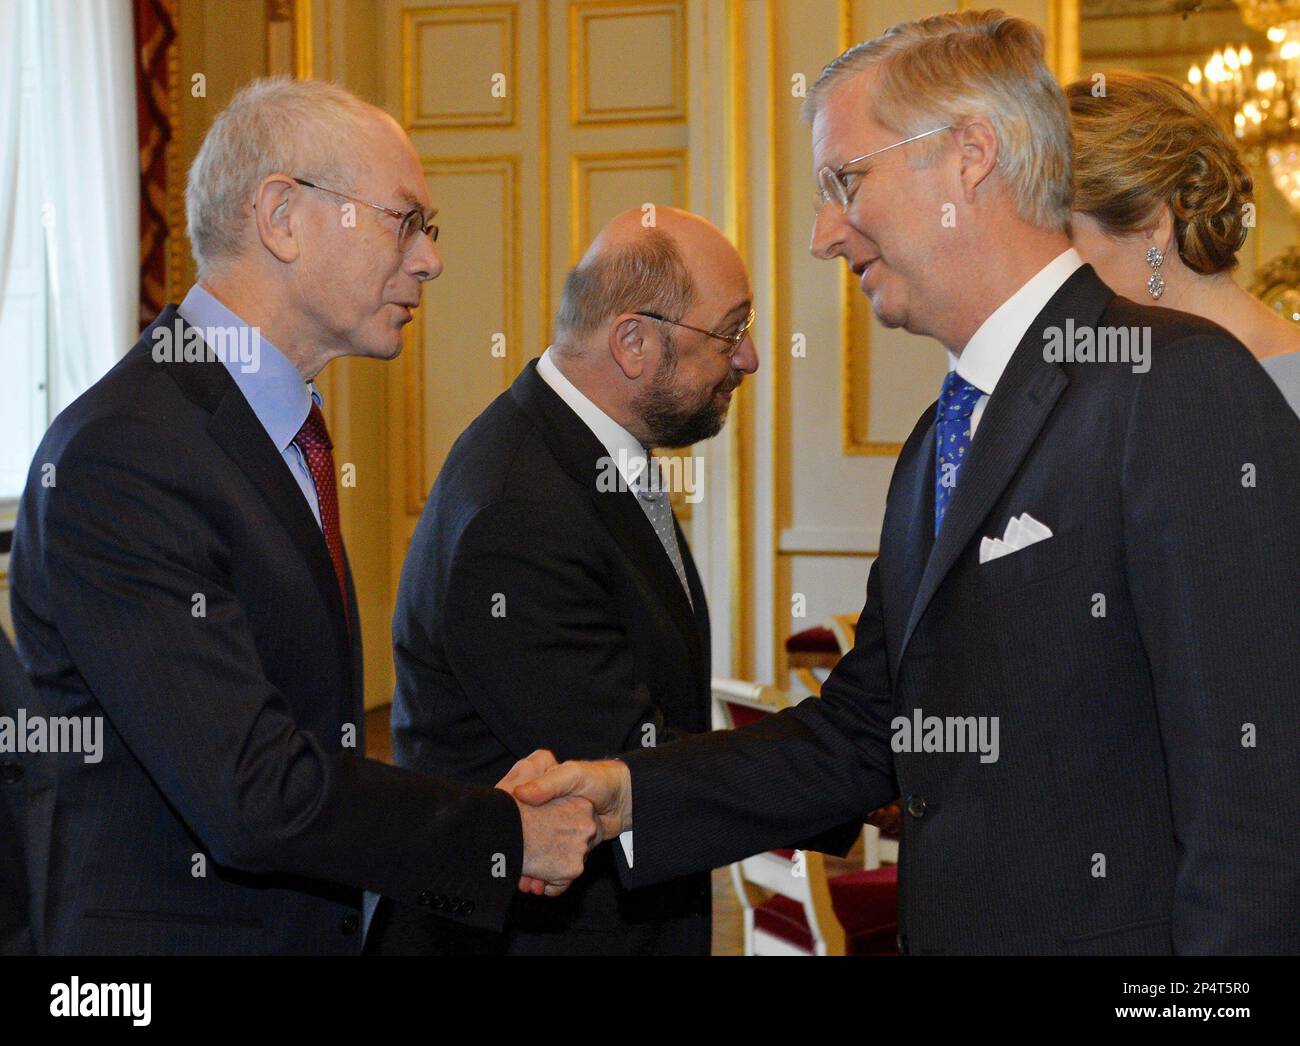 Belgium's King Philippe, right, shakes hands with European Council President Herman Van Rompuy, during a New Year's reception at the Royal Palace in Brussels, Friday Jan. 10, 2014. Belgium's King Philippe invited EU officials from all the EU institutions in Brussels, for the annual New Year's reception. (AP Photo/Eric Lalmand, pool) Stock Photo